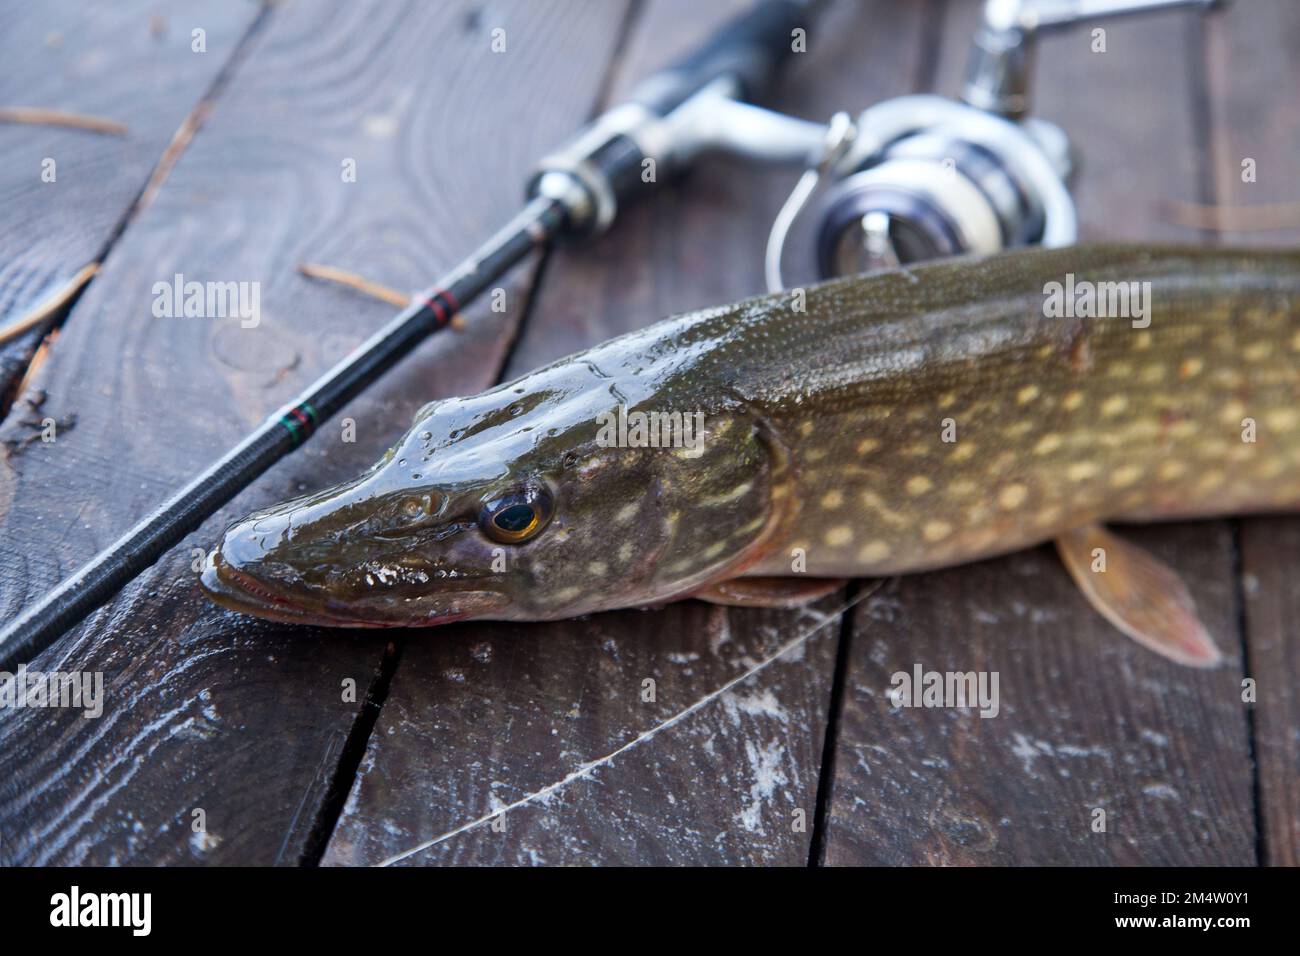 Freshwater Northern pike fish know as Esox Lucius and fishing rod with reel lying on vintage wooden background with yellow leaves at autumn time. Fish Stock Photo